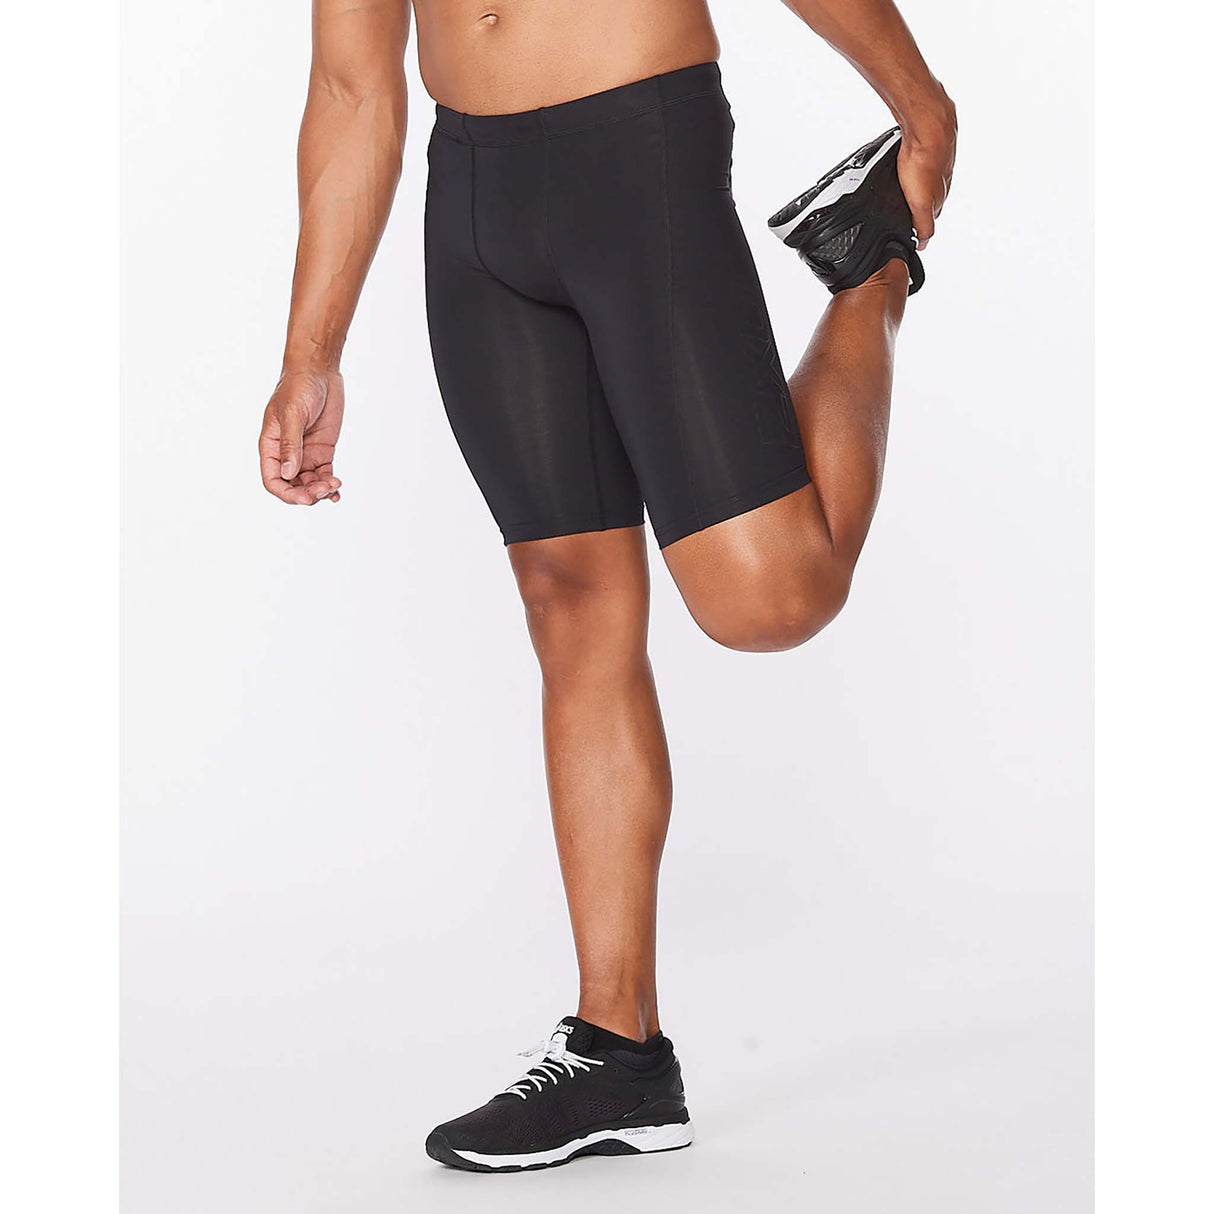 2XU Core Compression shorts noir nero homme lateral